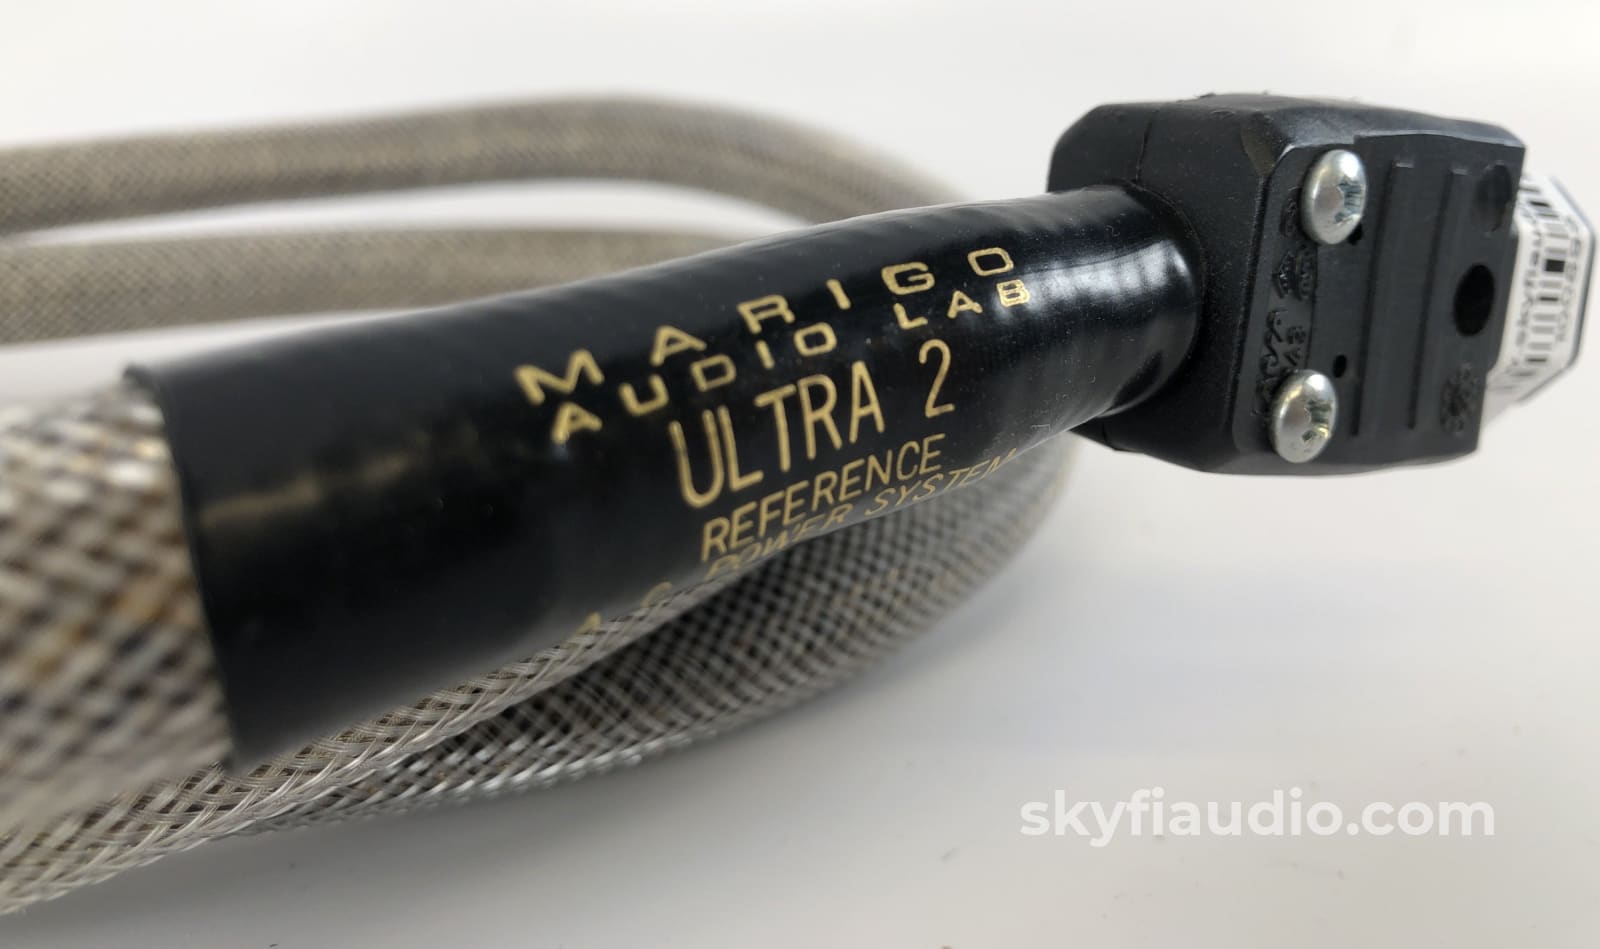 Marigo Audio Lab - Ultra 2 Reference A.c. Power System Cable 2M (2 Of 3) Cables